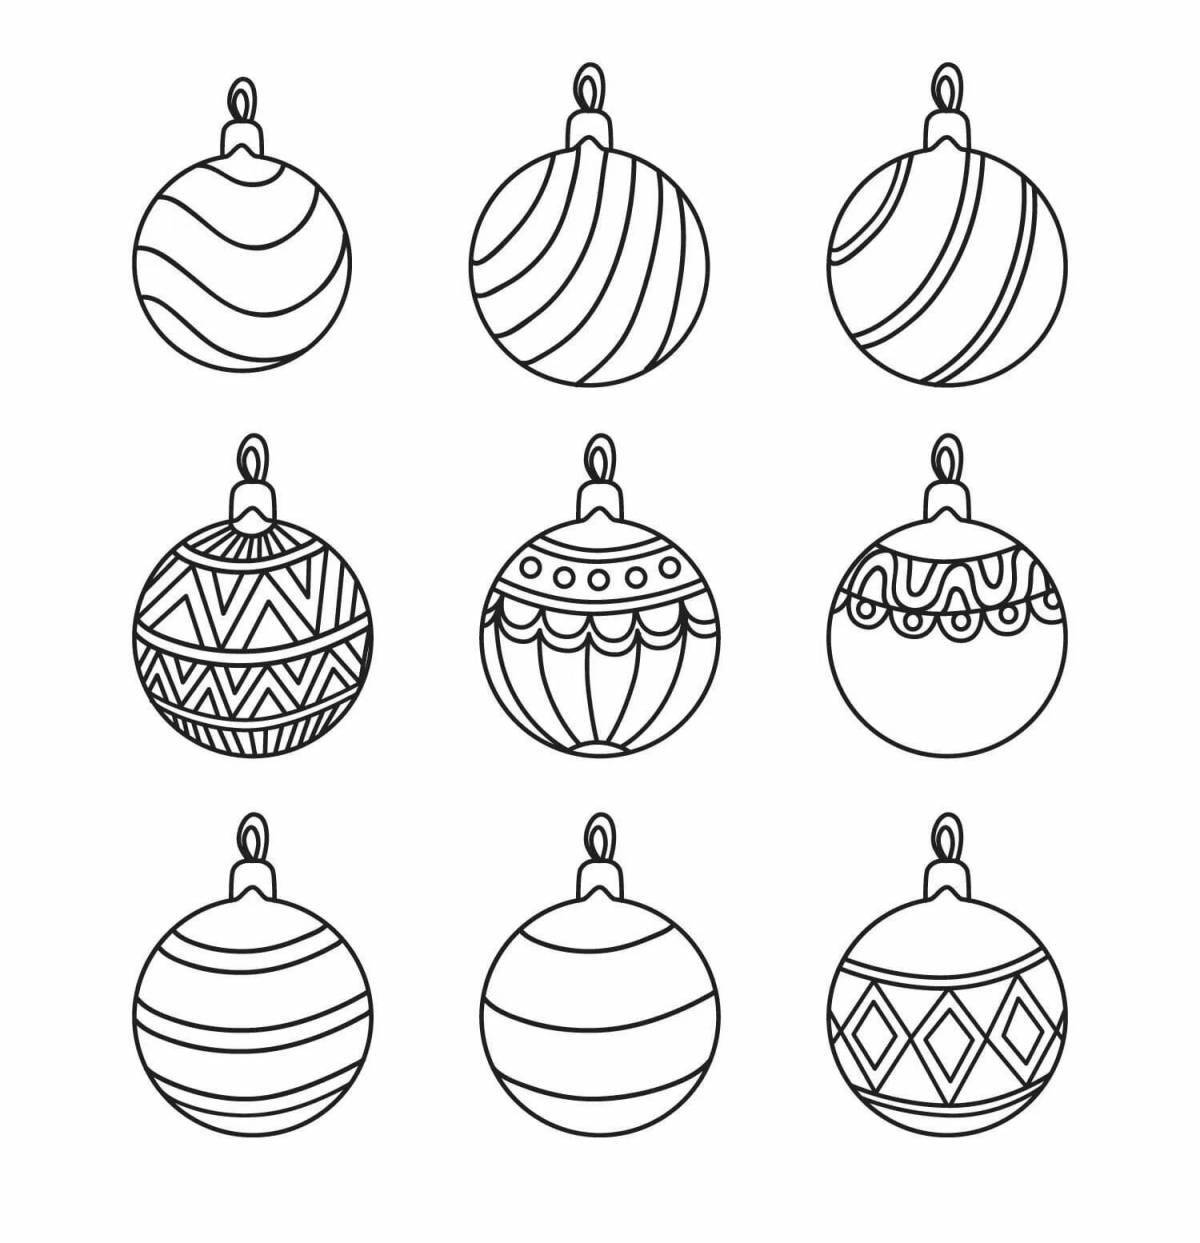 Royal Christmas decorations coloring pages